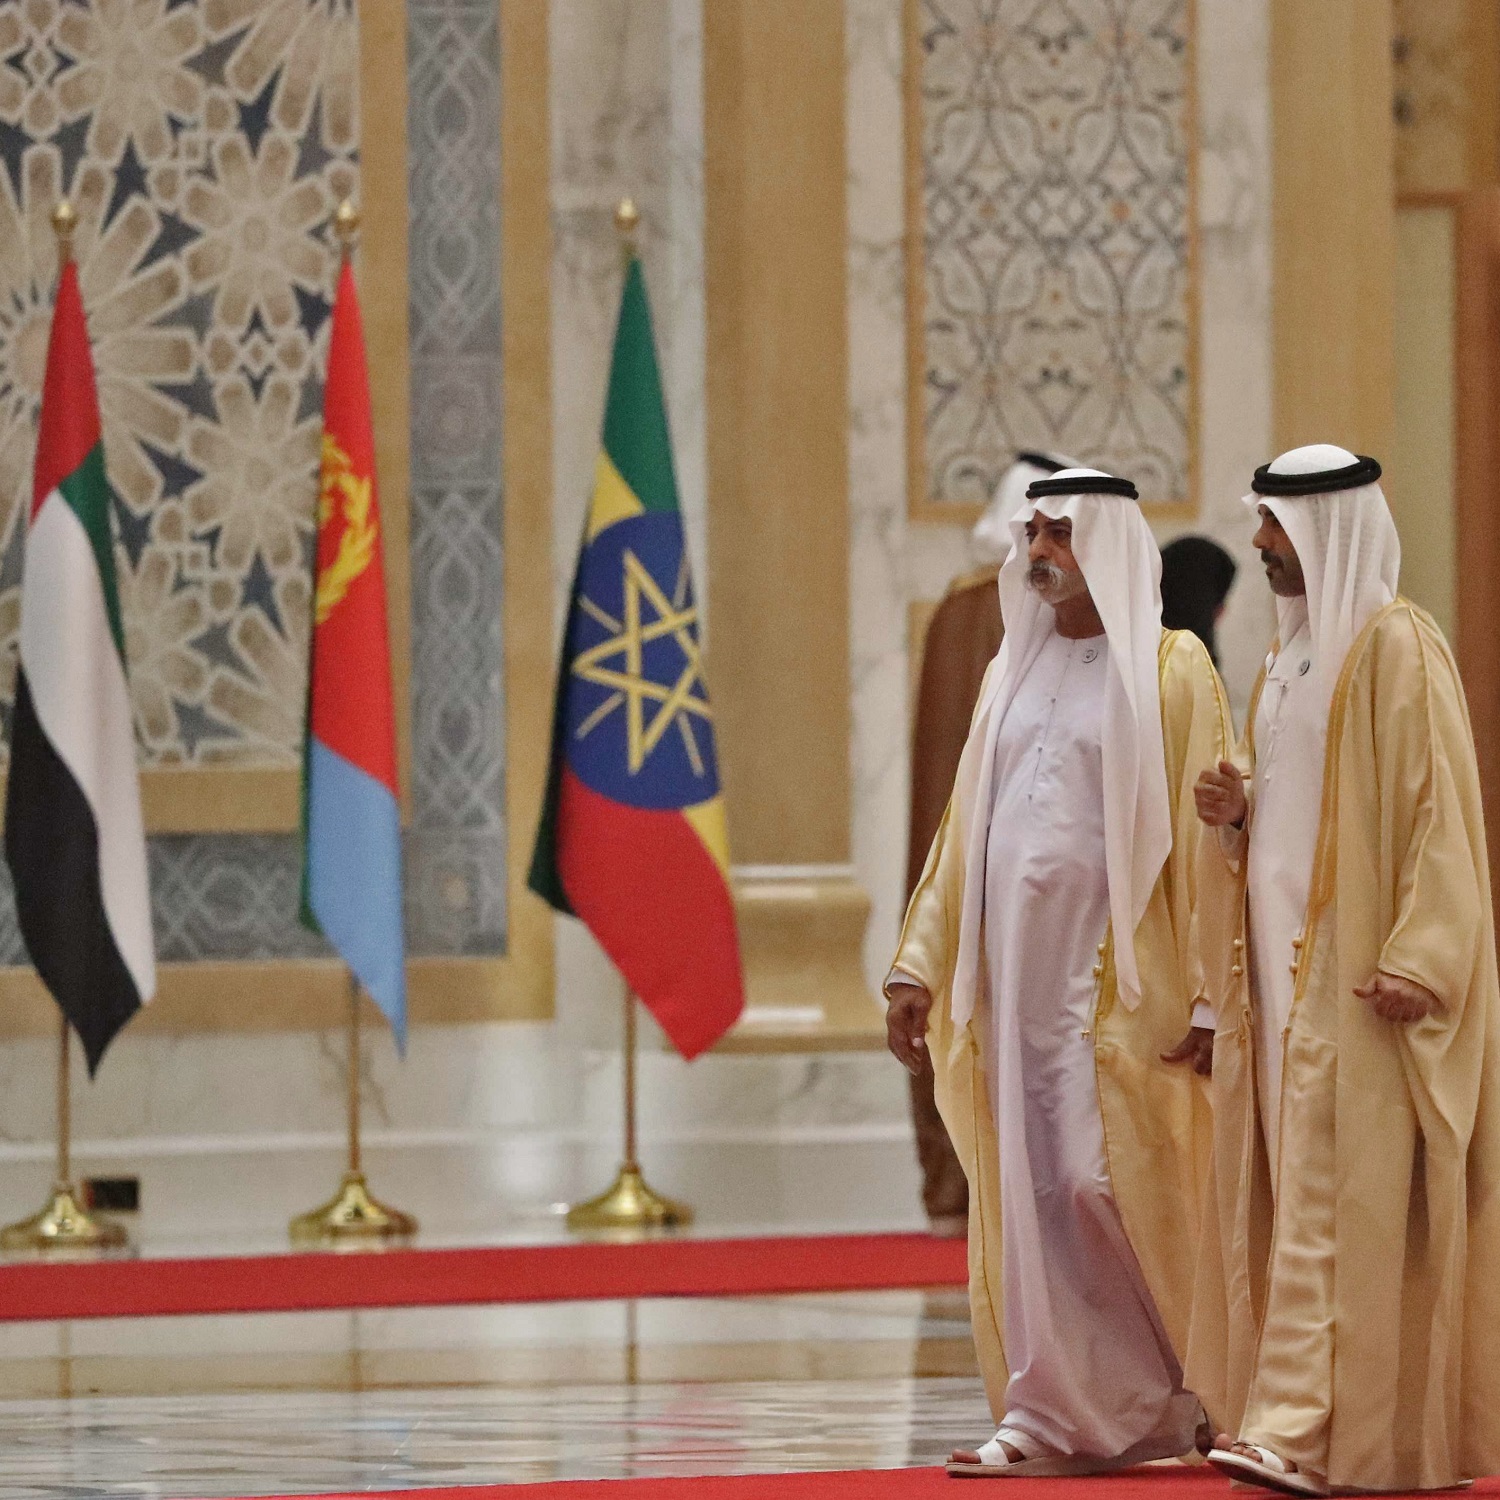 Emirati ministers gather at the presidential palace in the UAE capital Abu Dhabi in July 2018 to receive the visiting Ethiopian prime minister and Eritrean president, with state flags in the background